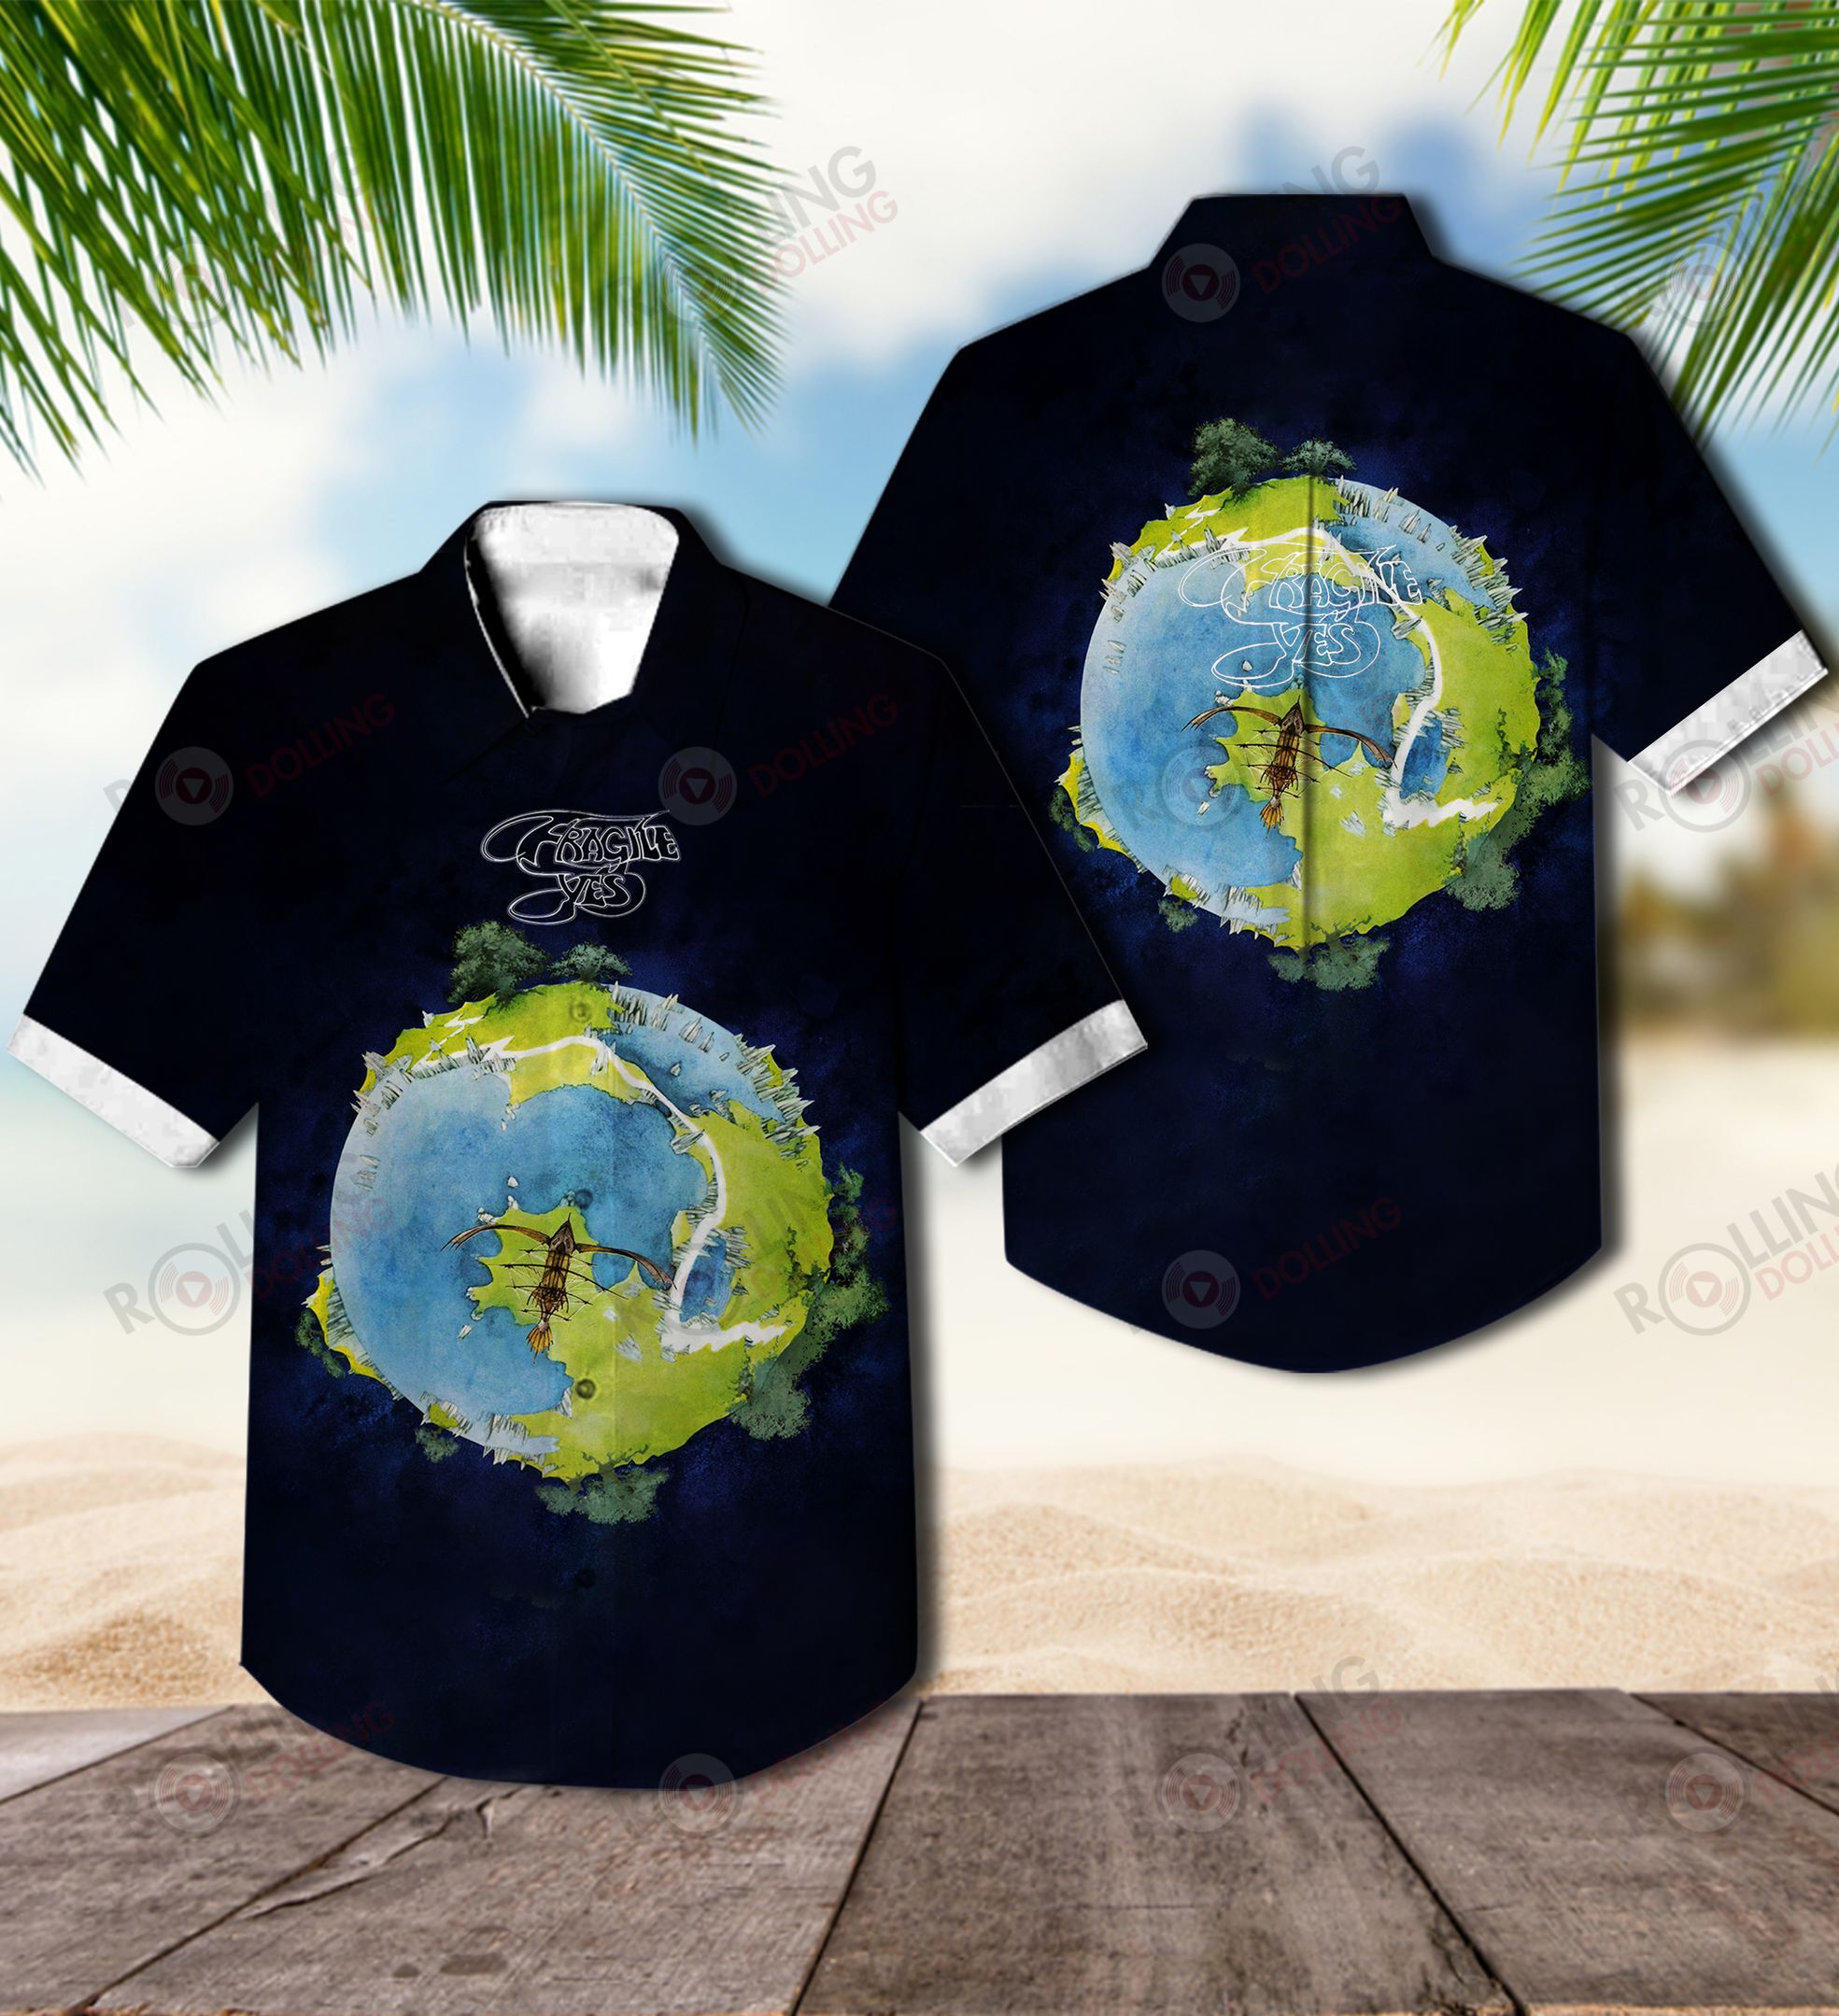 For summer, consider wearing This Amazing Hawaiian Shirt shirt in our store 183